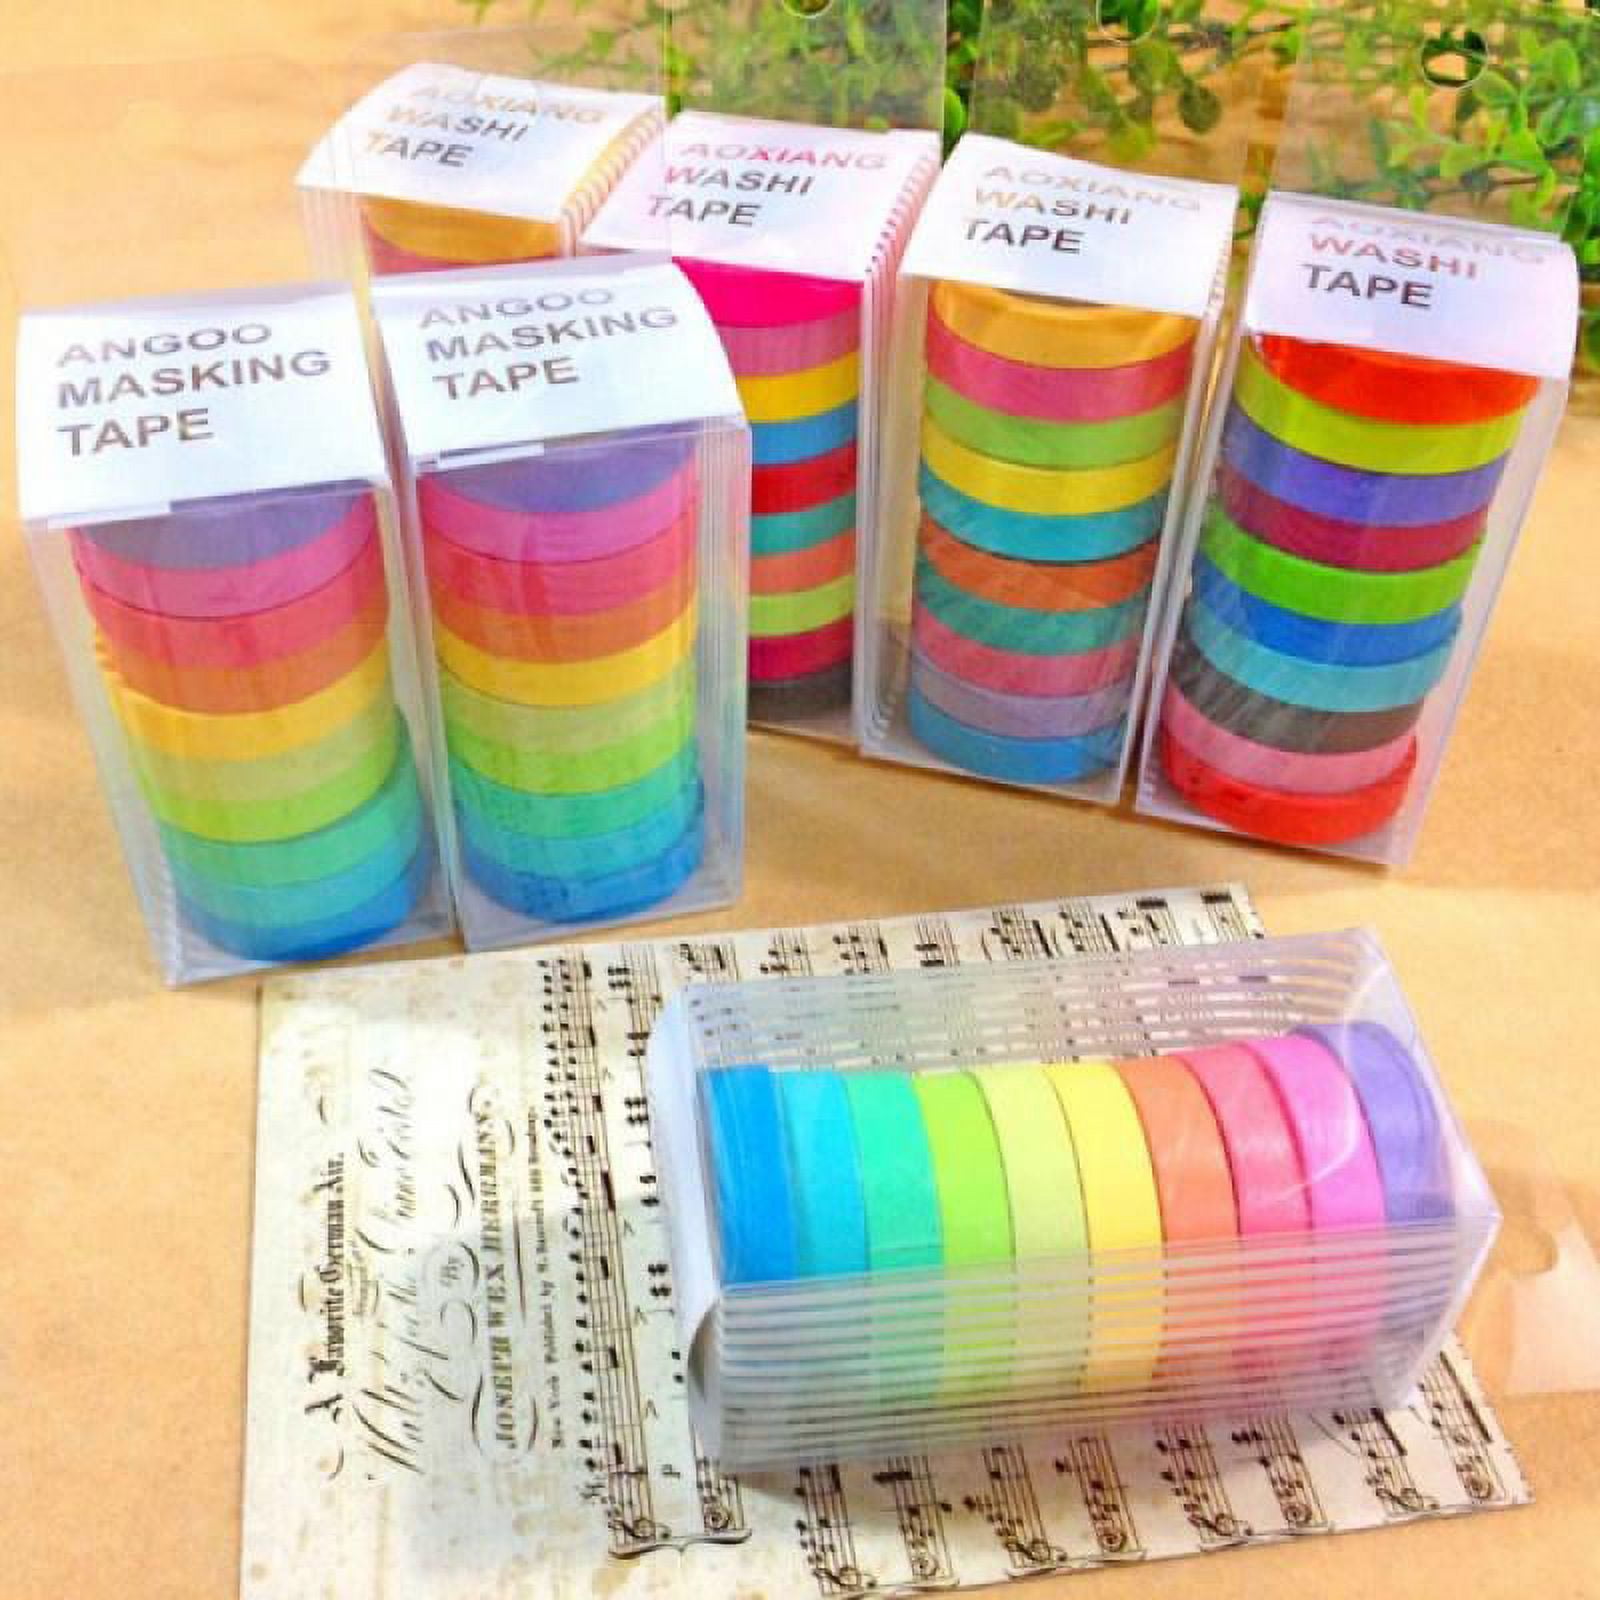 HTVRONT Colored Masking Tape - Colorful Masking Tape 1 Inch x 14